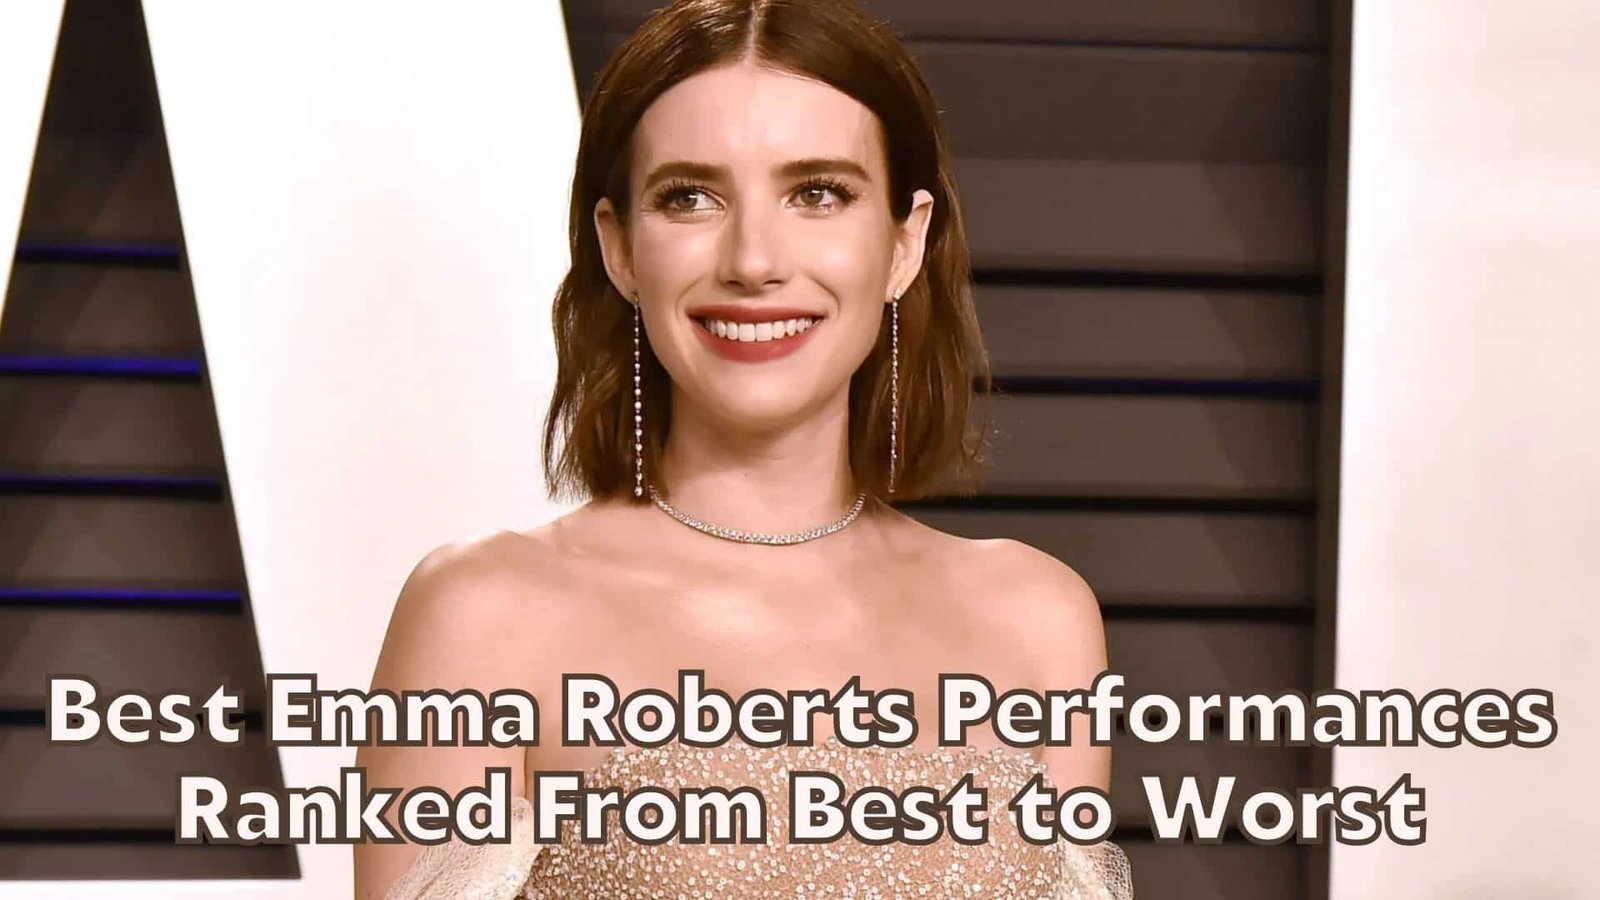 Best Emma Roberts Performances Ranked From Best to Worst